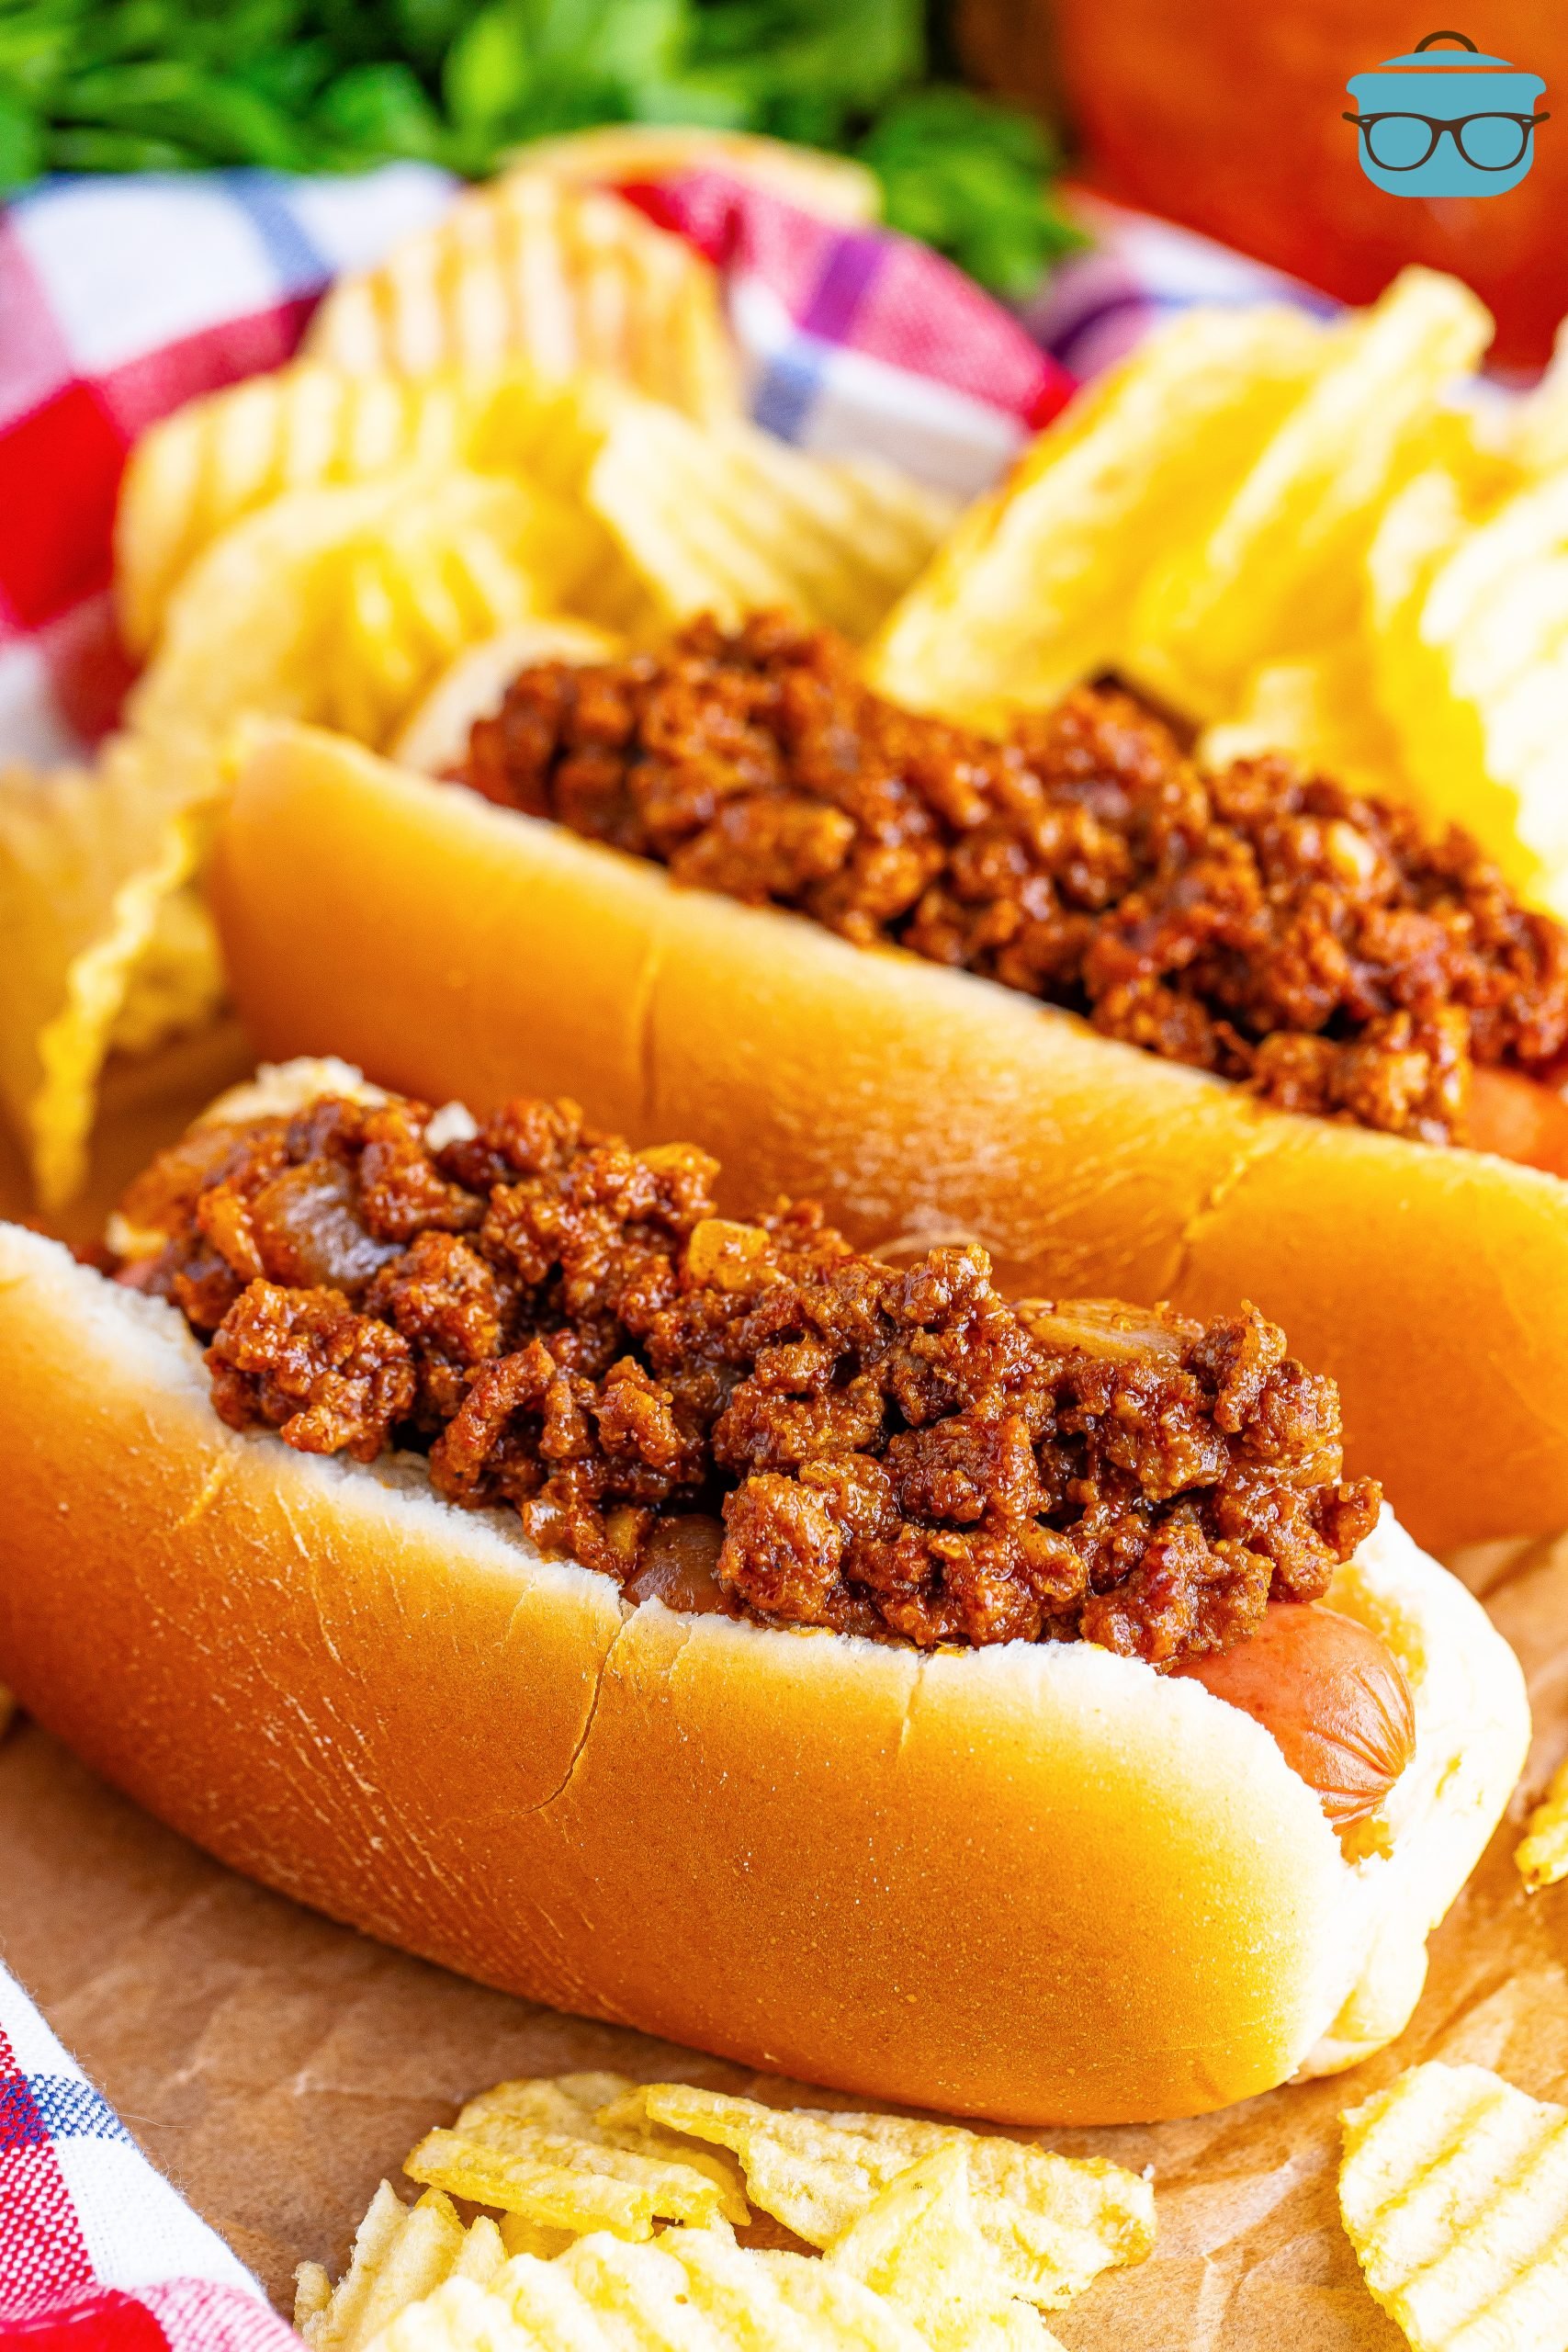 A few Chili Dogs with Hot Dog Chili.